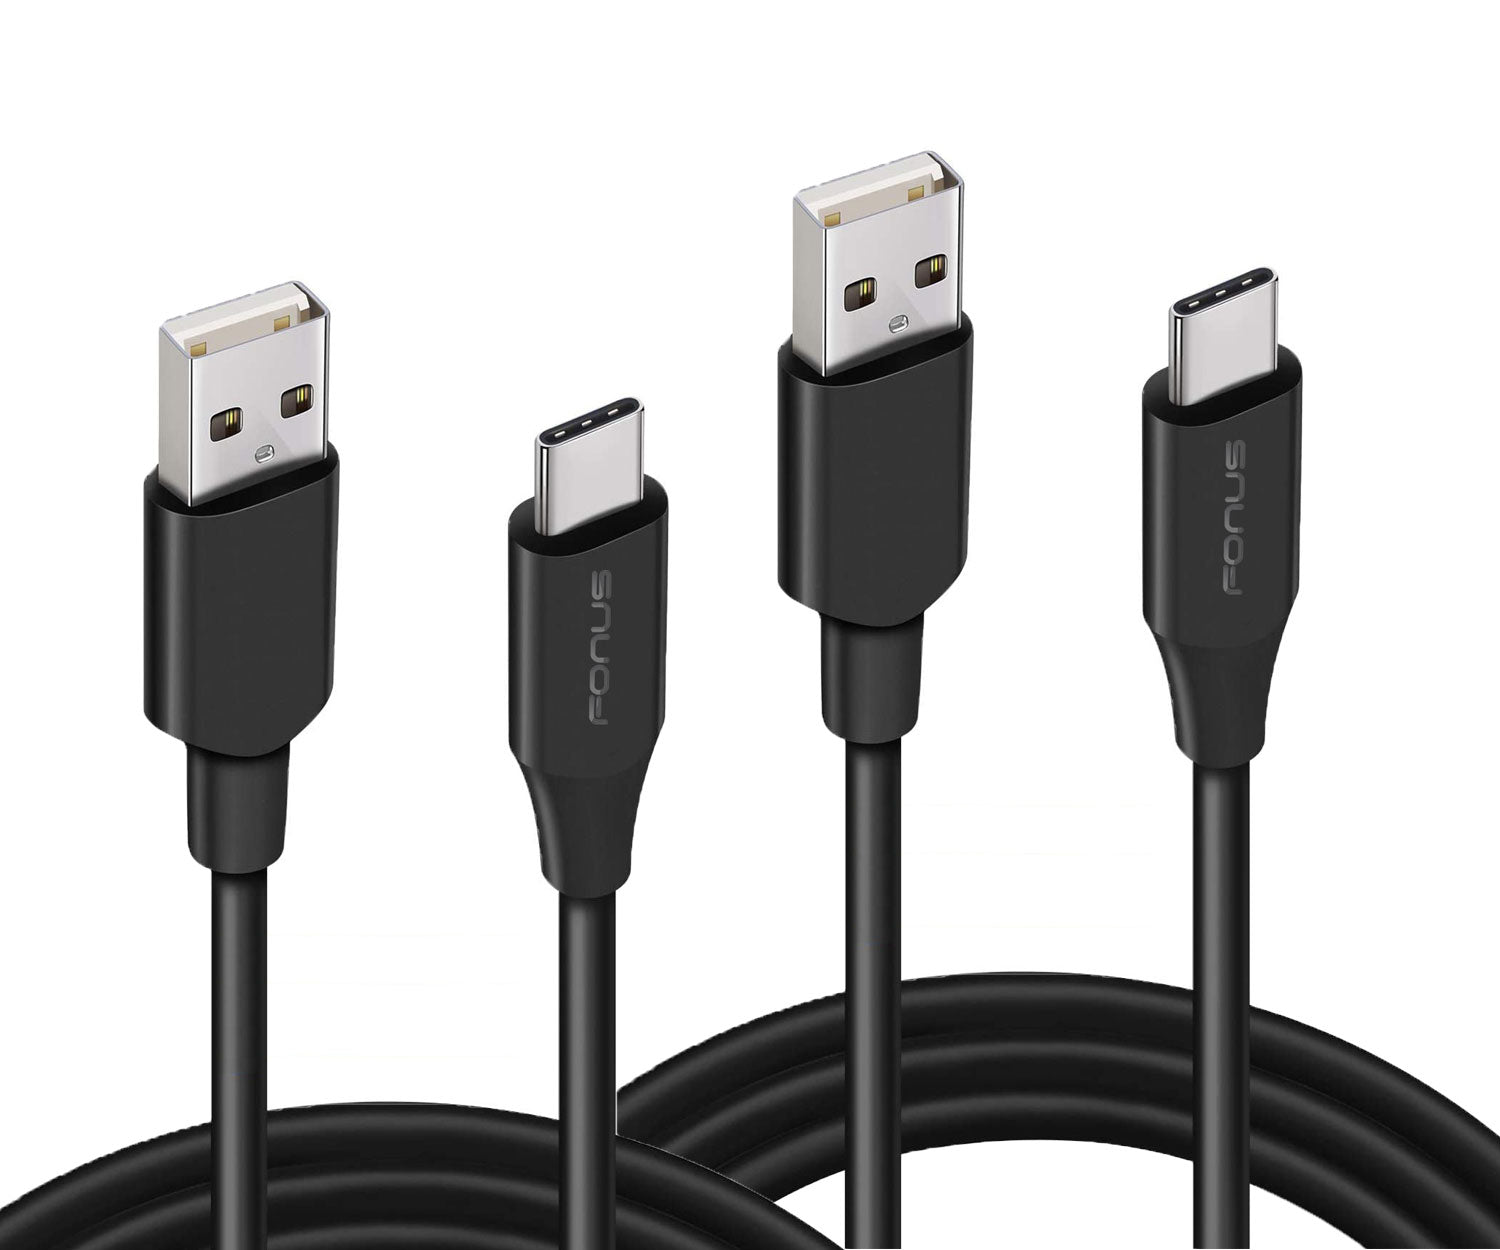 3ft and 6ft Long USB-C Cables Fast Charge TYPE-C Cord Power Wire Data Sync High Speed - ONY74